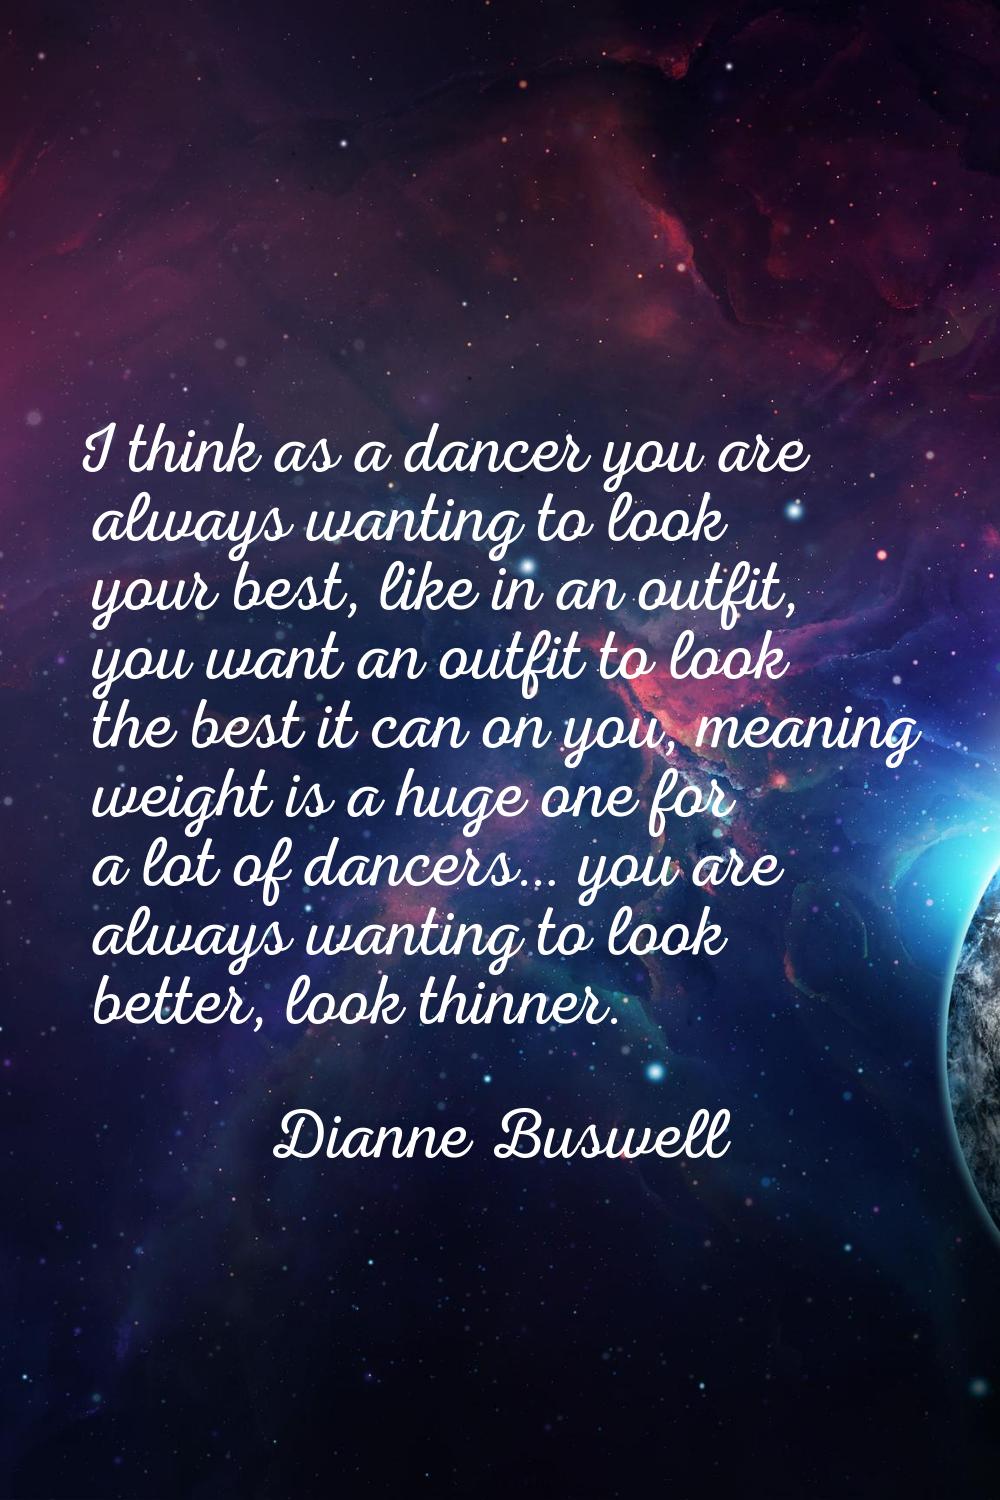 I think as a dancer you are always wanting to look your best, like in an outfit, you want an outfit